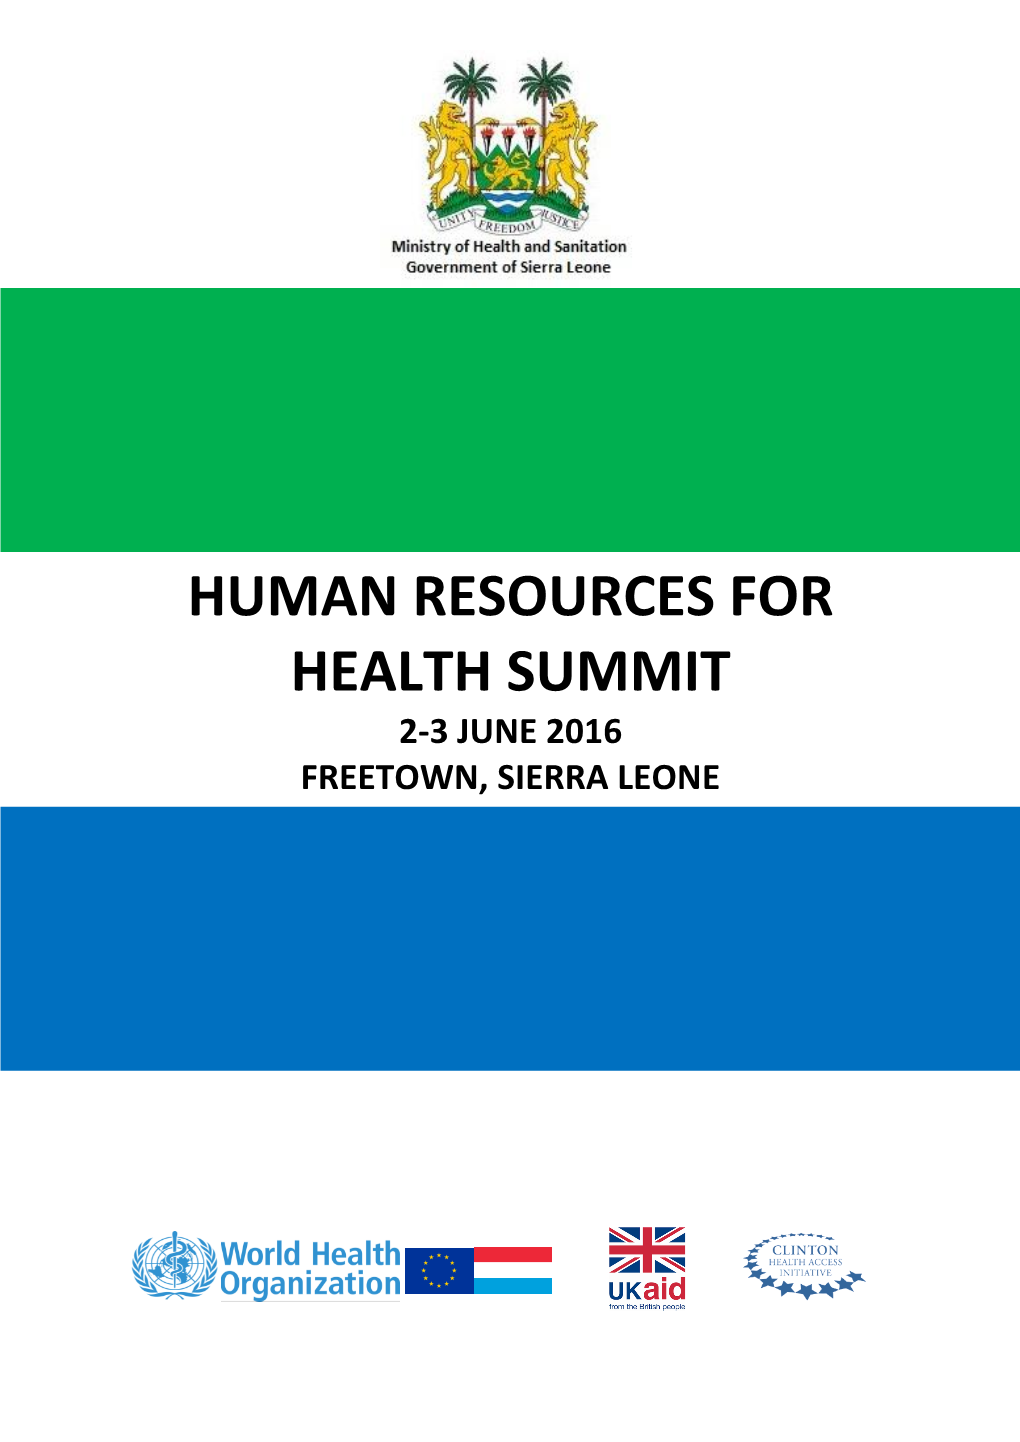 Human Resources for Health Summit-June 2-3, 2016